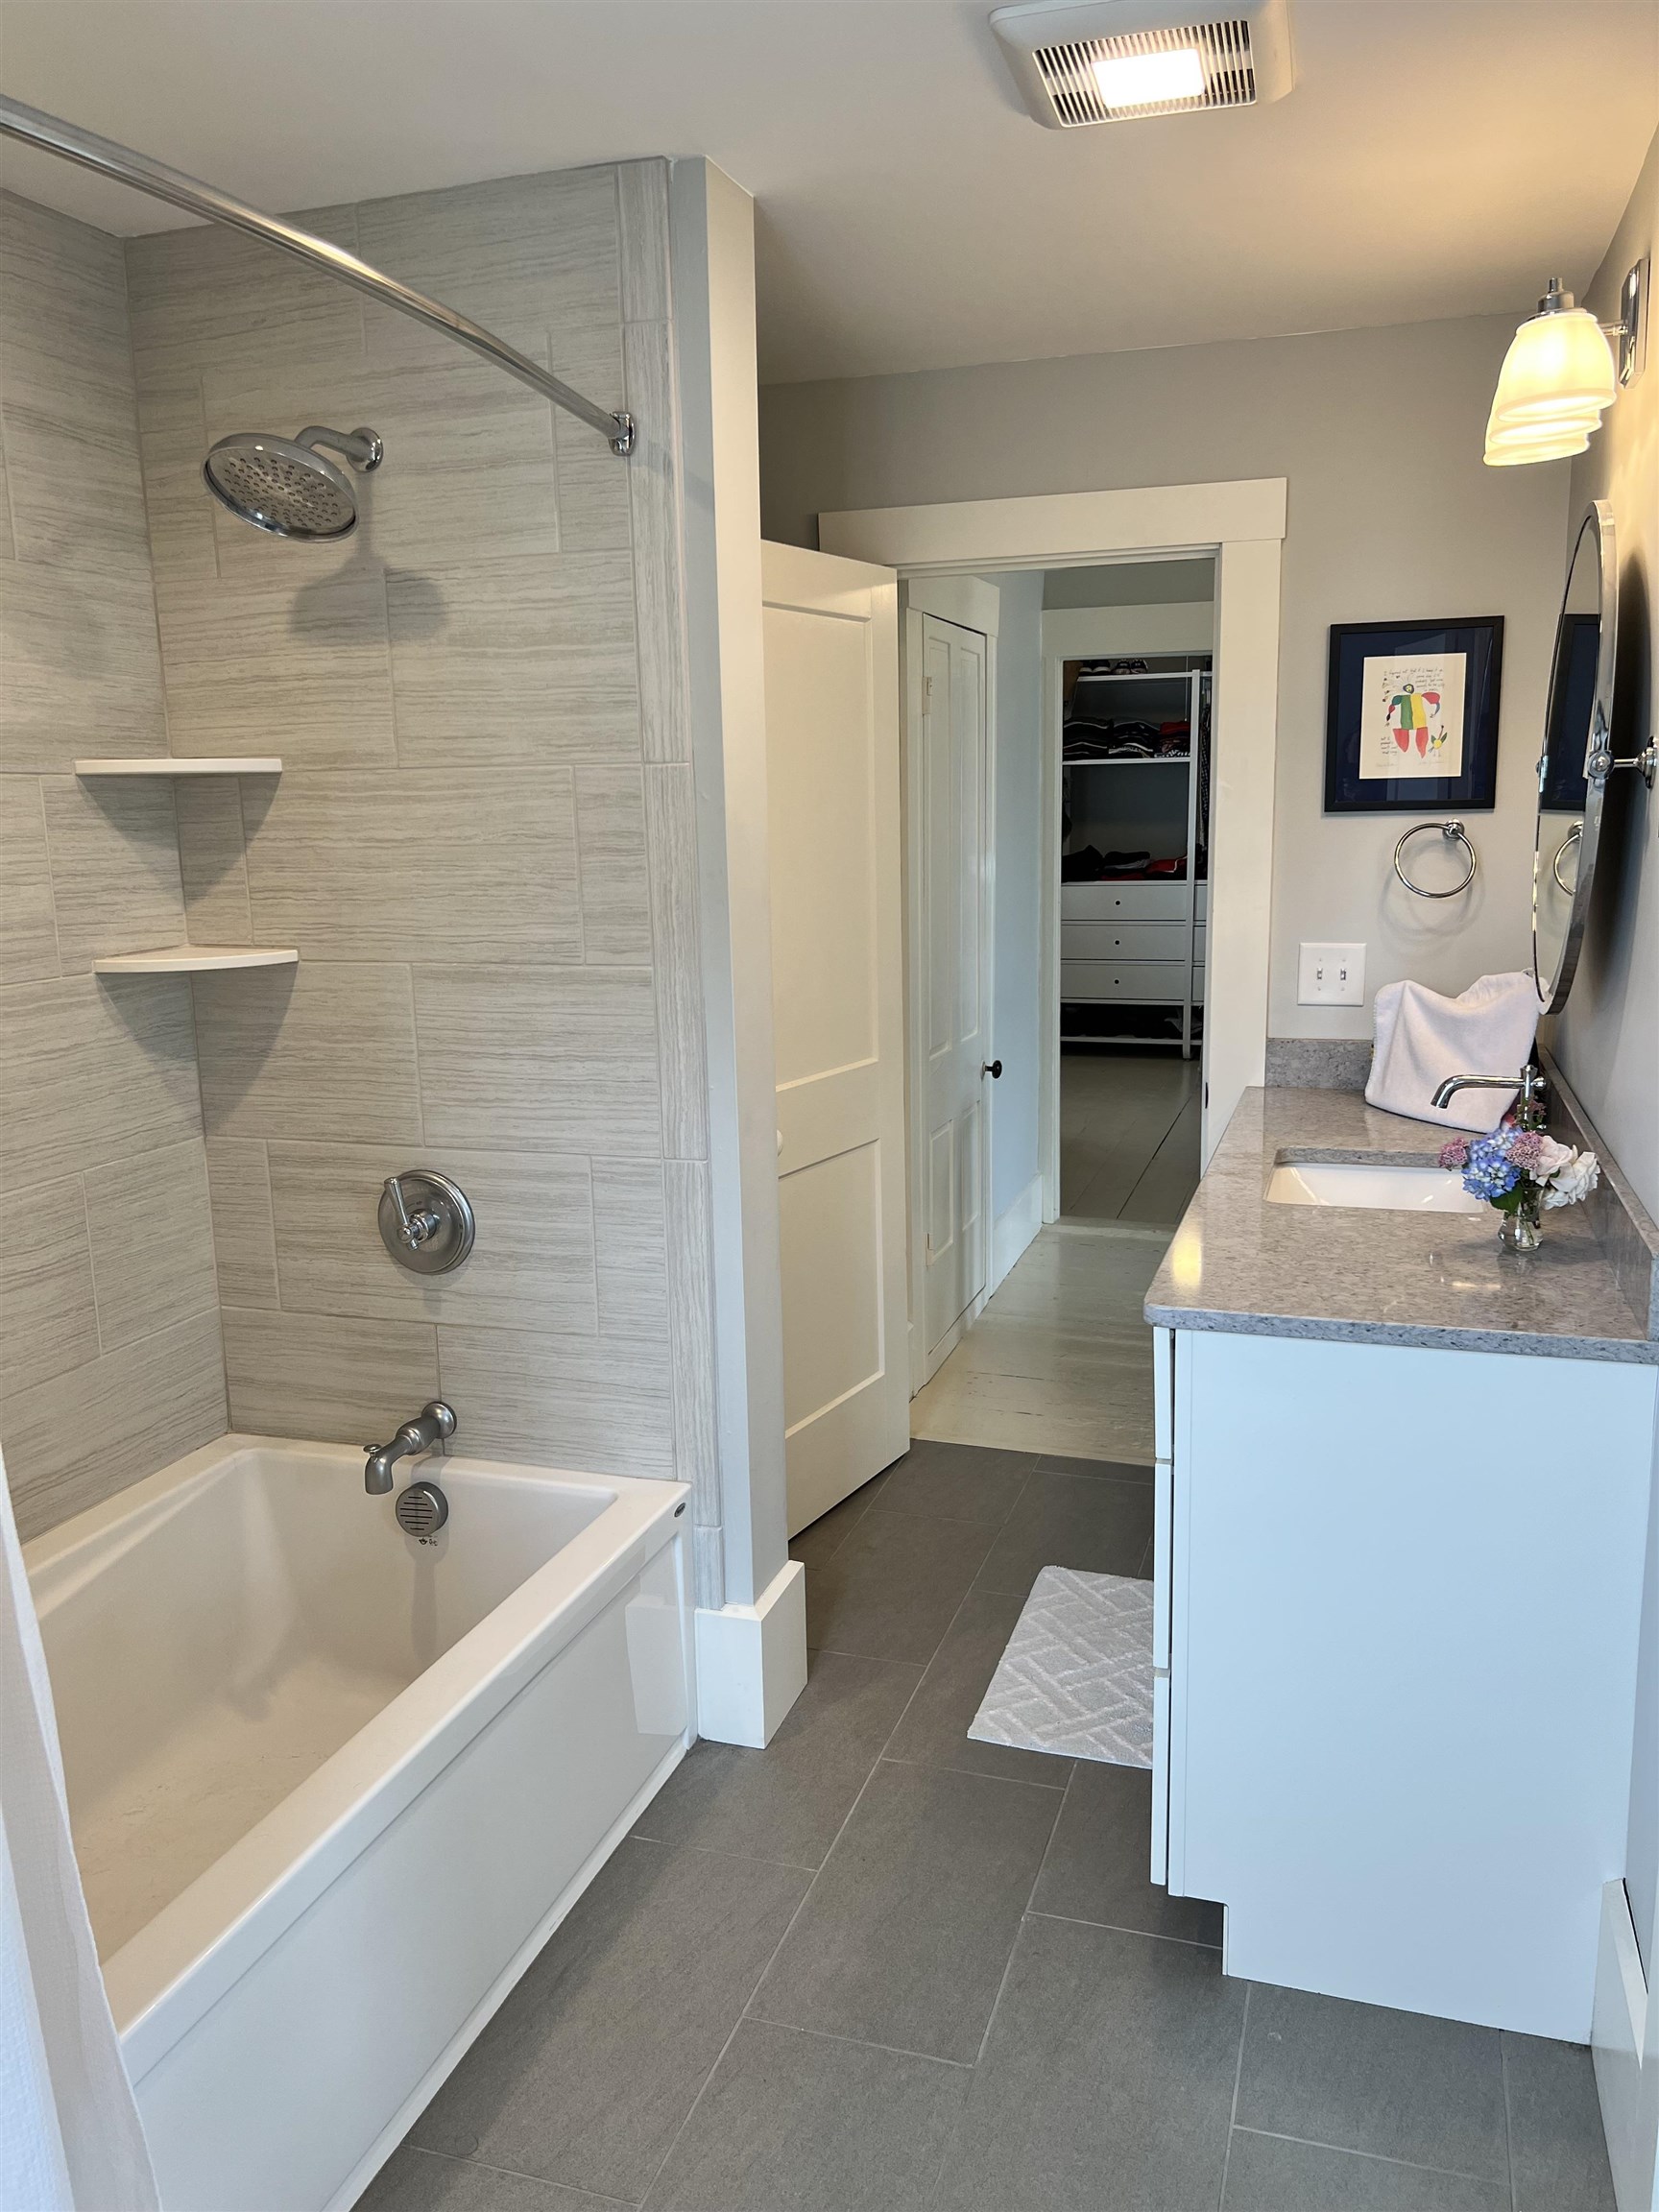 Three bedrooms share this beautiful tiled tub/shower bathroom, with quartz counters, and a white shaker vanity.